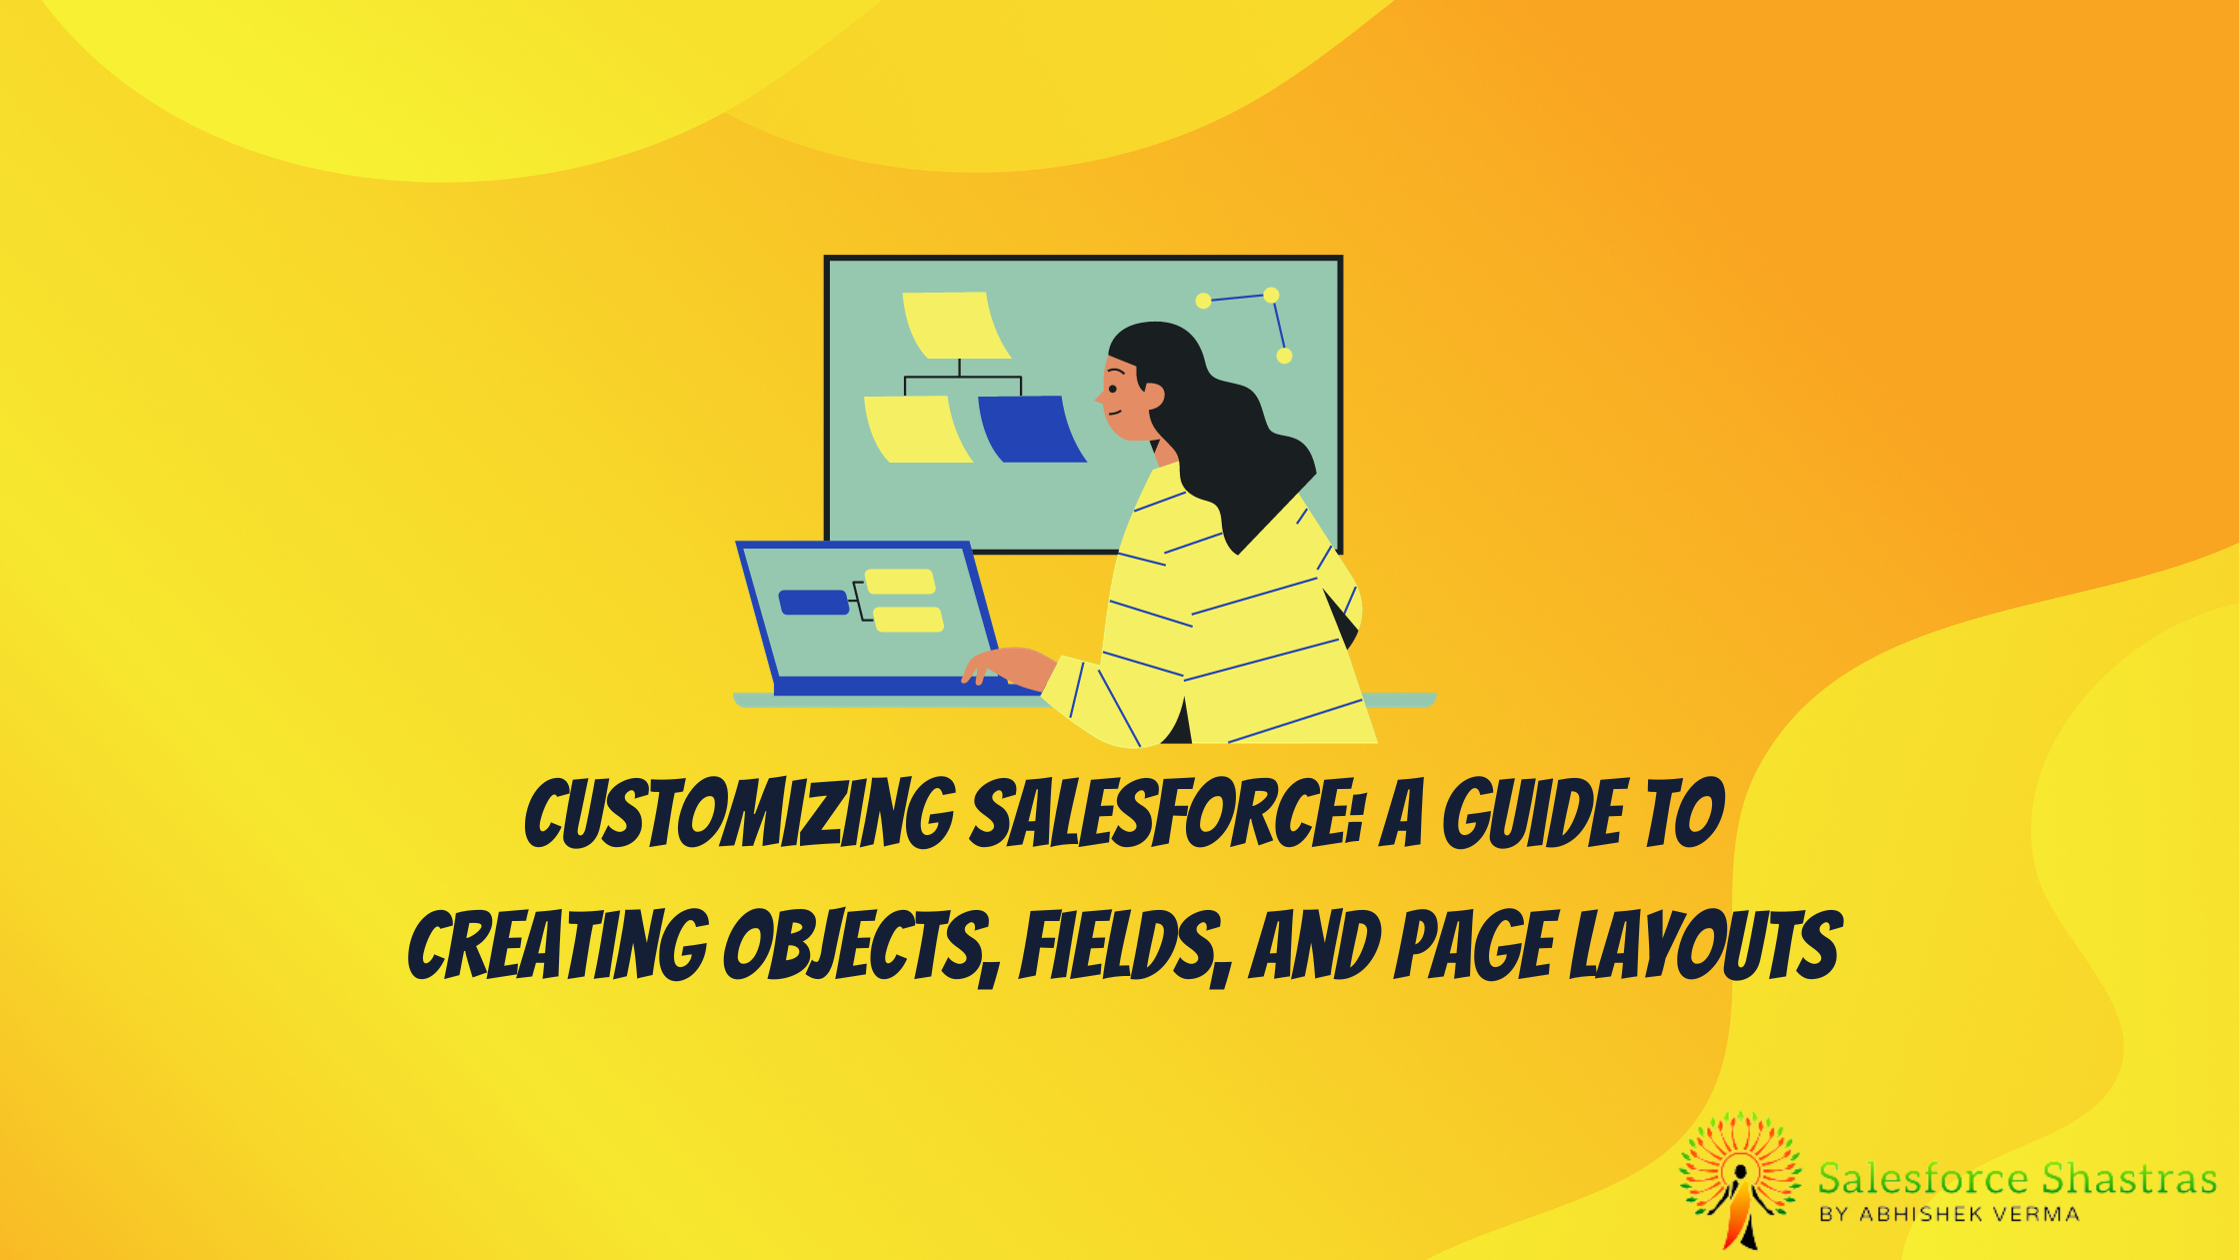 Customizing Salesforce: A Guide to Creating Objects, Fields, and Page Layouts